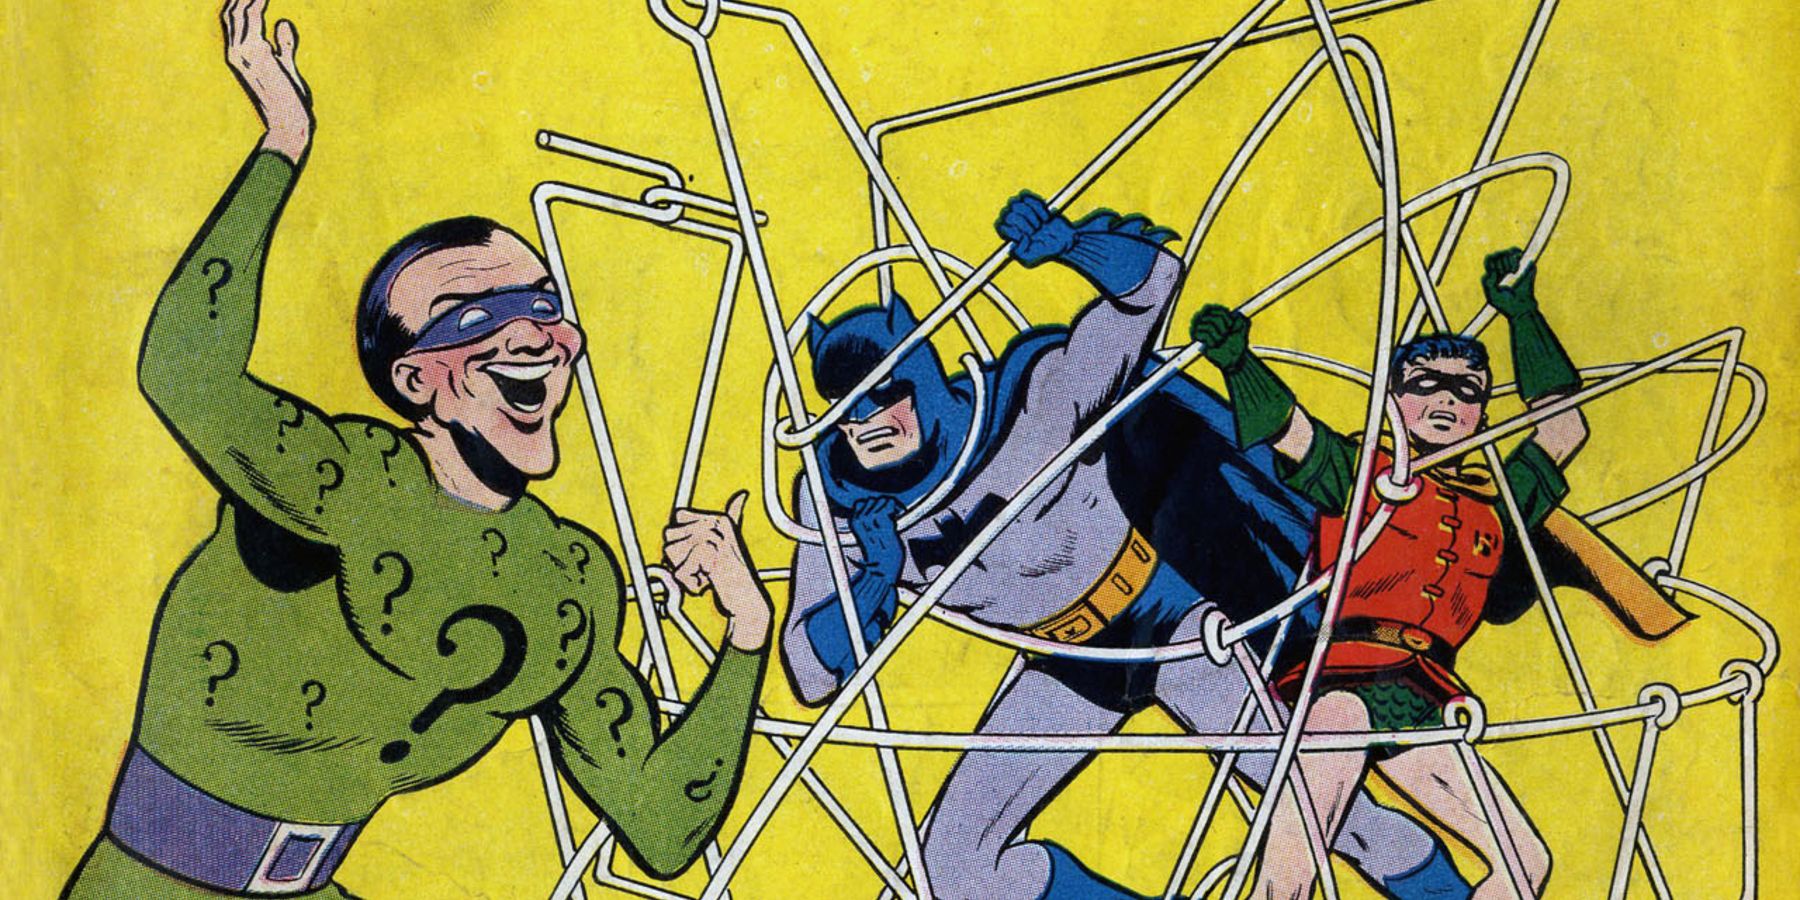 The Riddler capturing Batman and Robin in cover artwork for Detective Comics #140